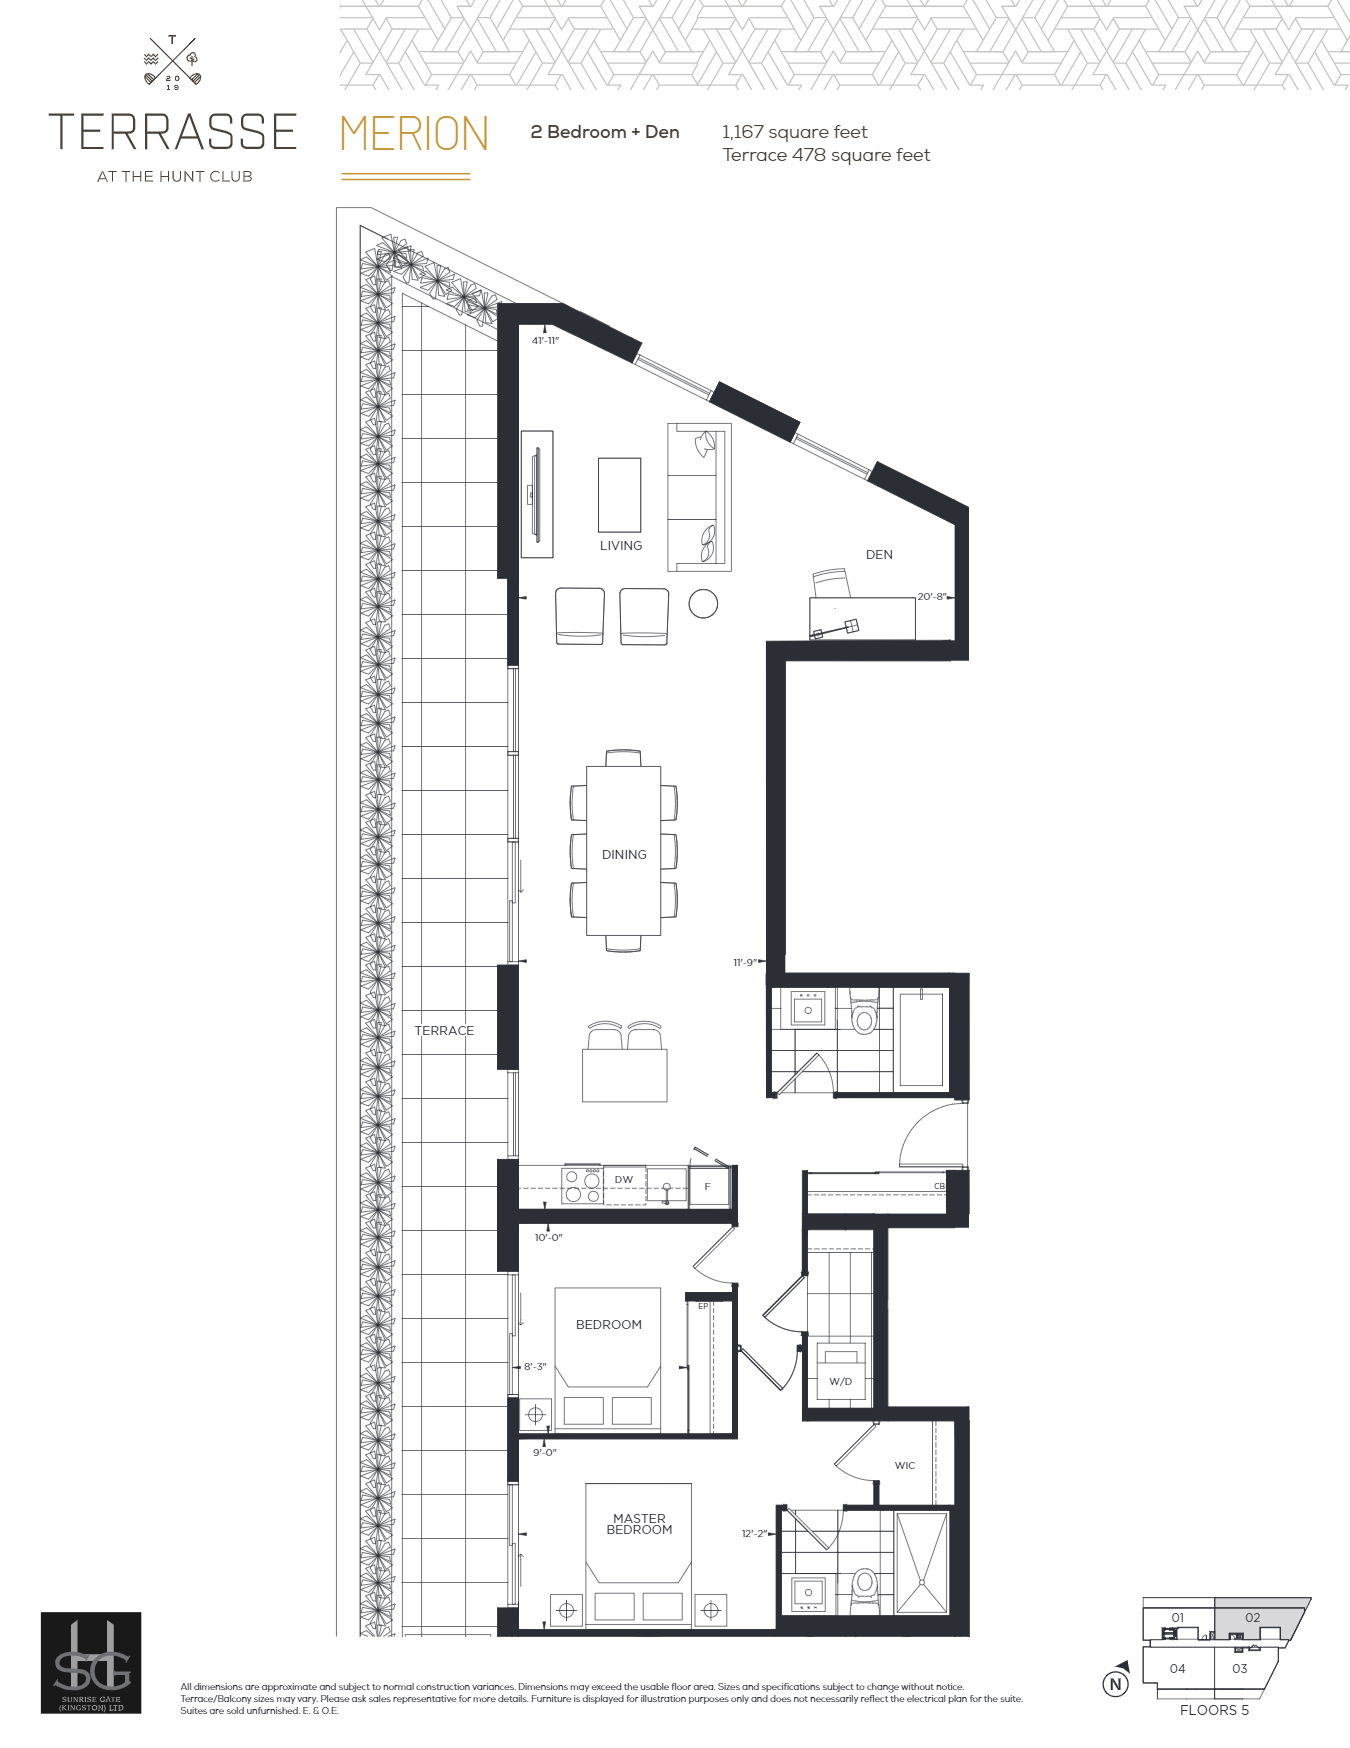  Merion Floor Plan of Terrasse Condos at The Hunt Club  with undefined beds